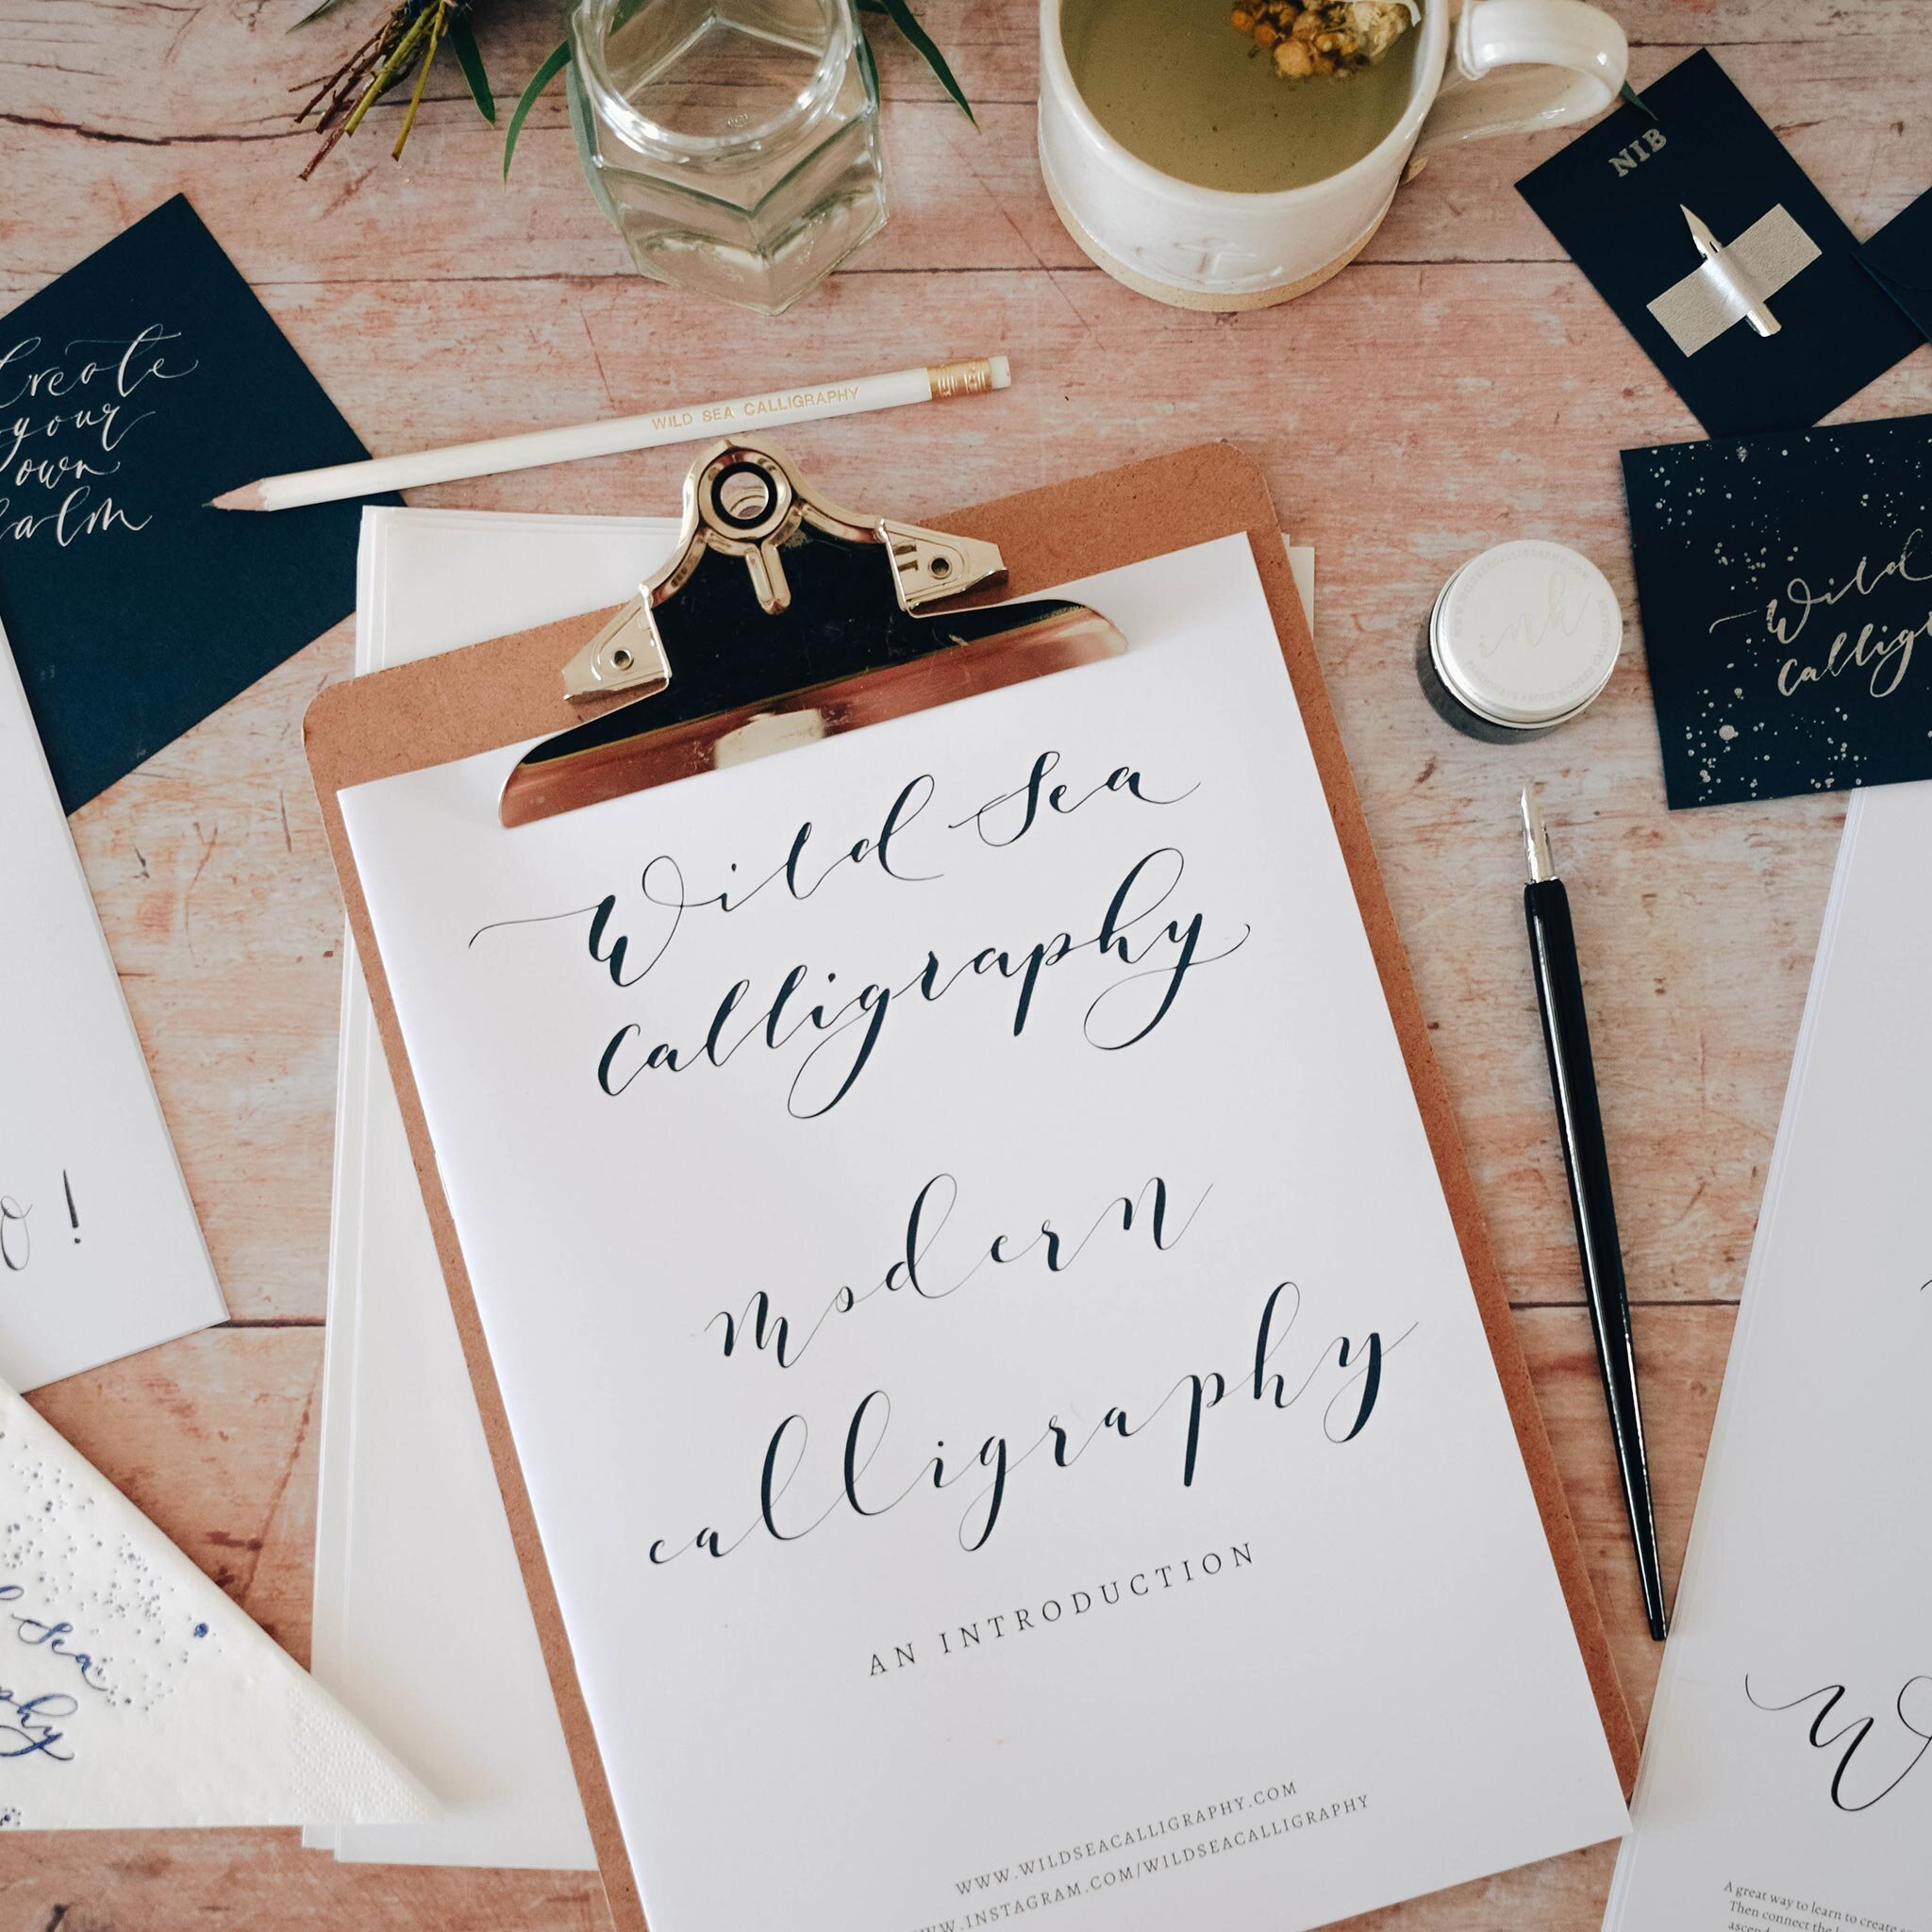 How to Learn Modern Calligraphy at Home — Wild Sea Calligraphy - Modern  Calligraphy Workshops in Devon and Cornwall